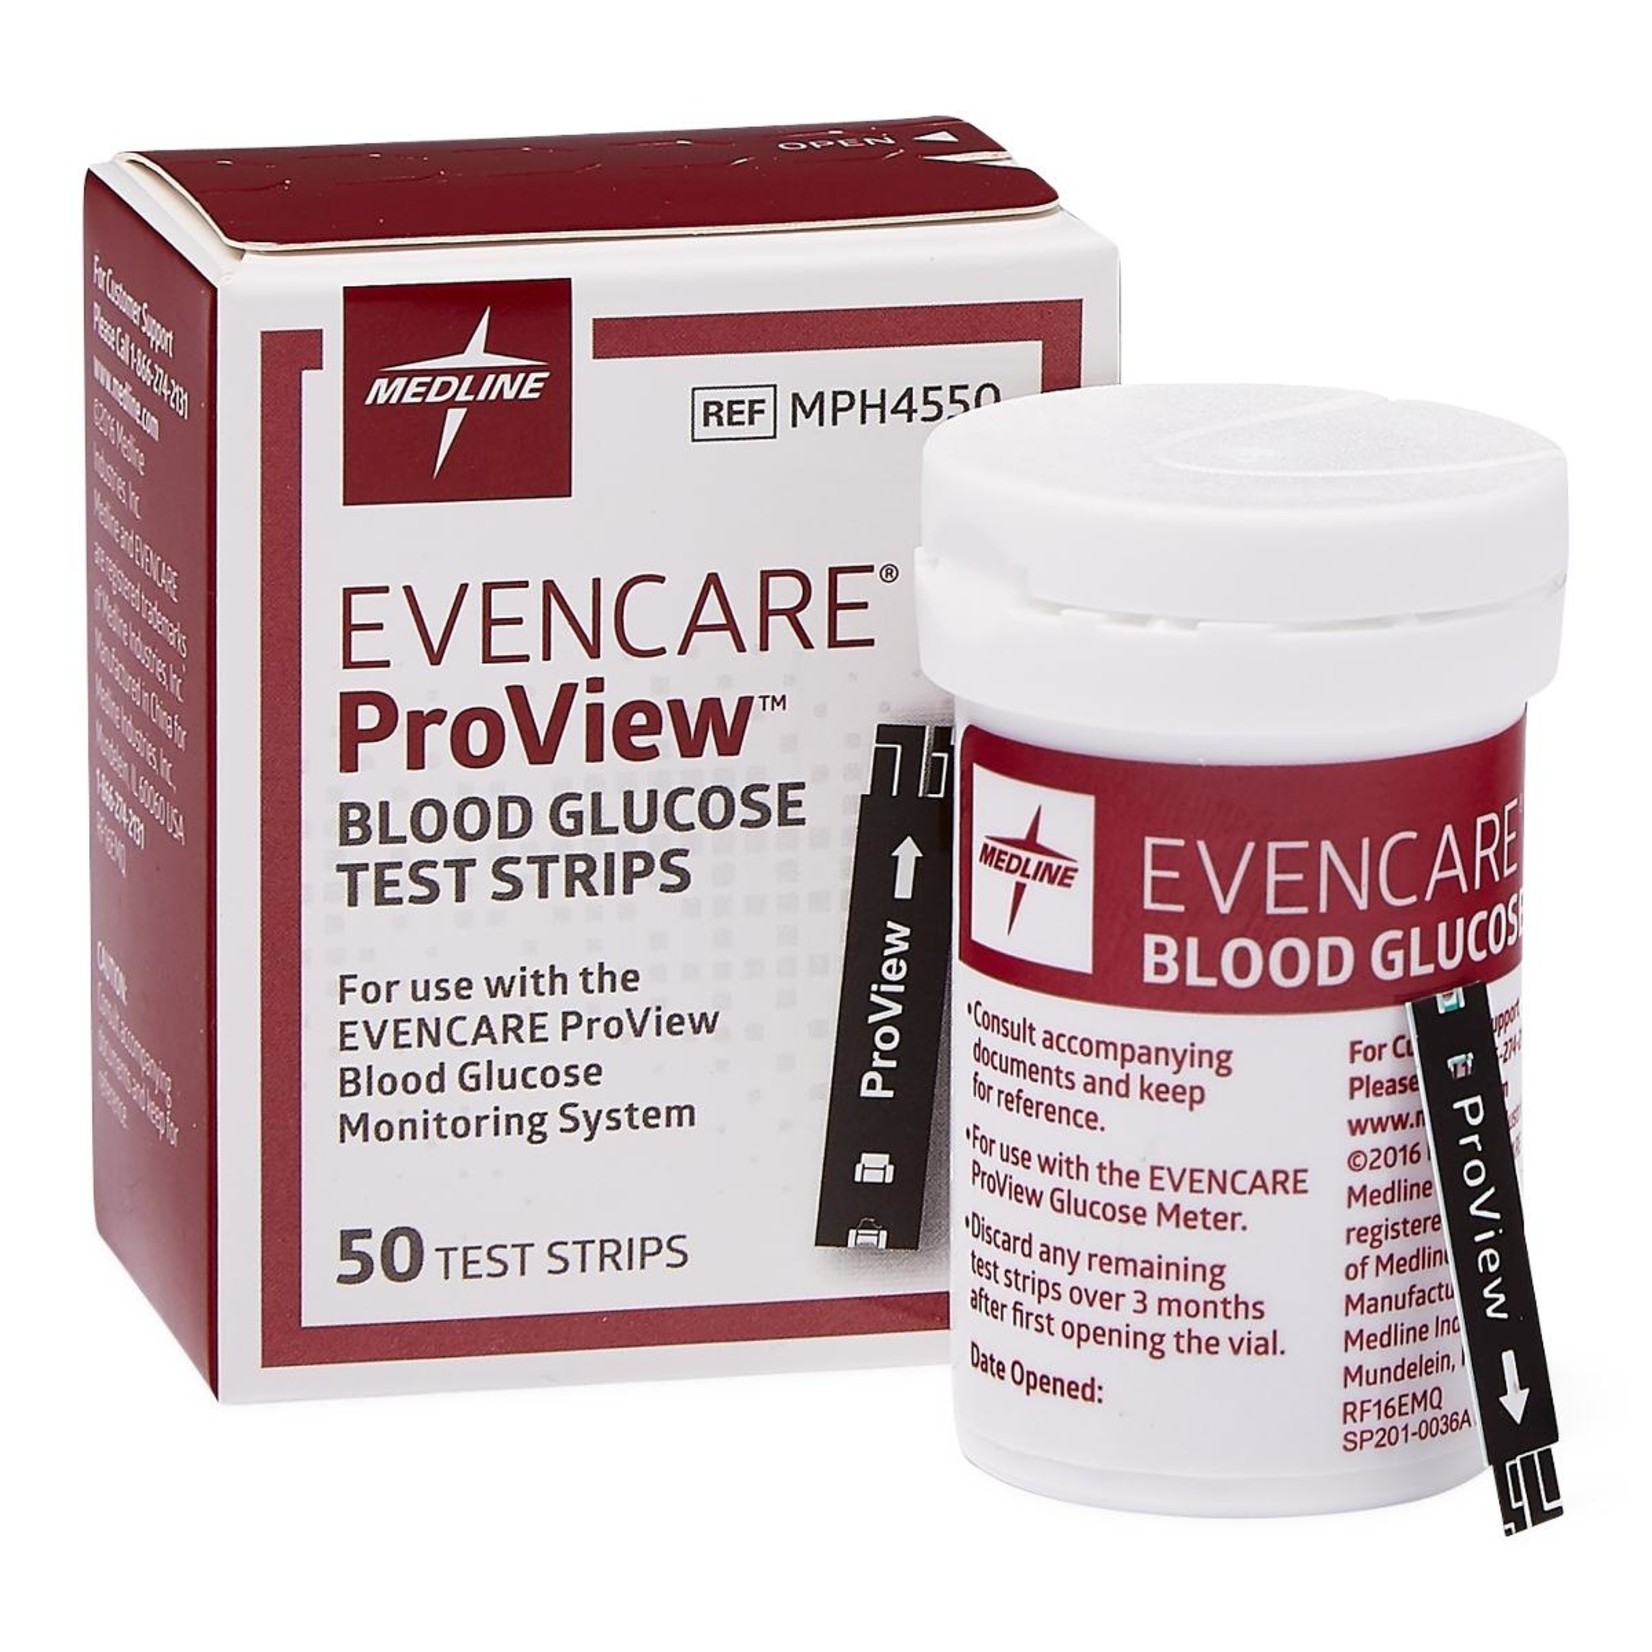 EVENCARE ProView Blood Glucose Test Strips 50 ct